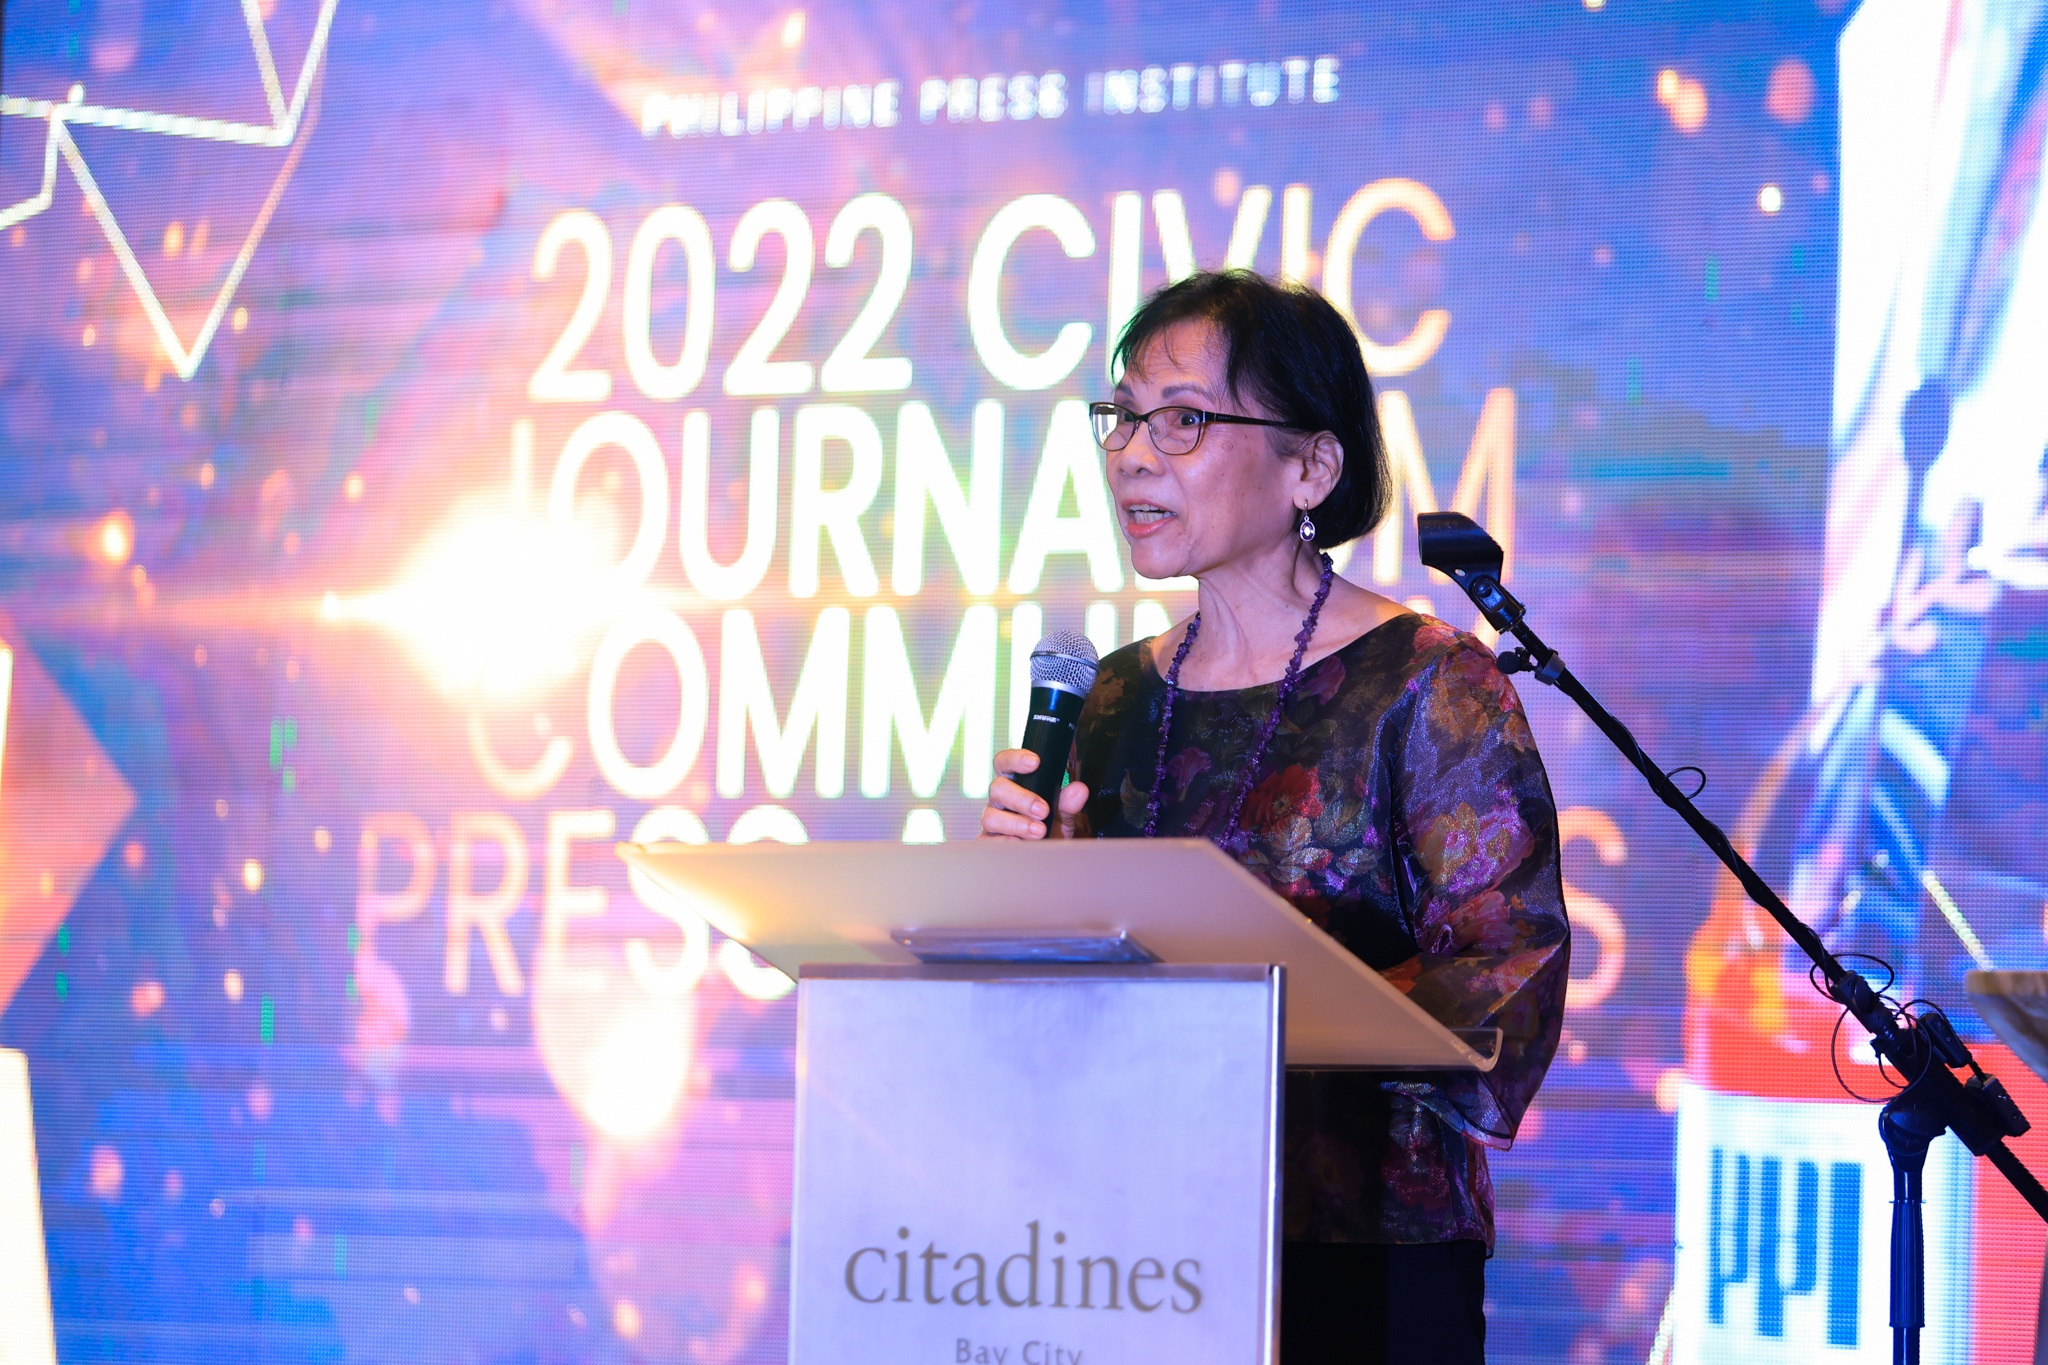 Ma. Ann Lopez of Asia Institute of Journalism and Communication talking about the criteria for judging during the 2022 Civic Journalism Community Press Awards. Photo by Kier Labrador